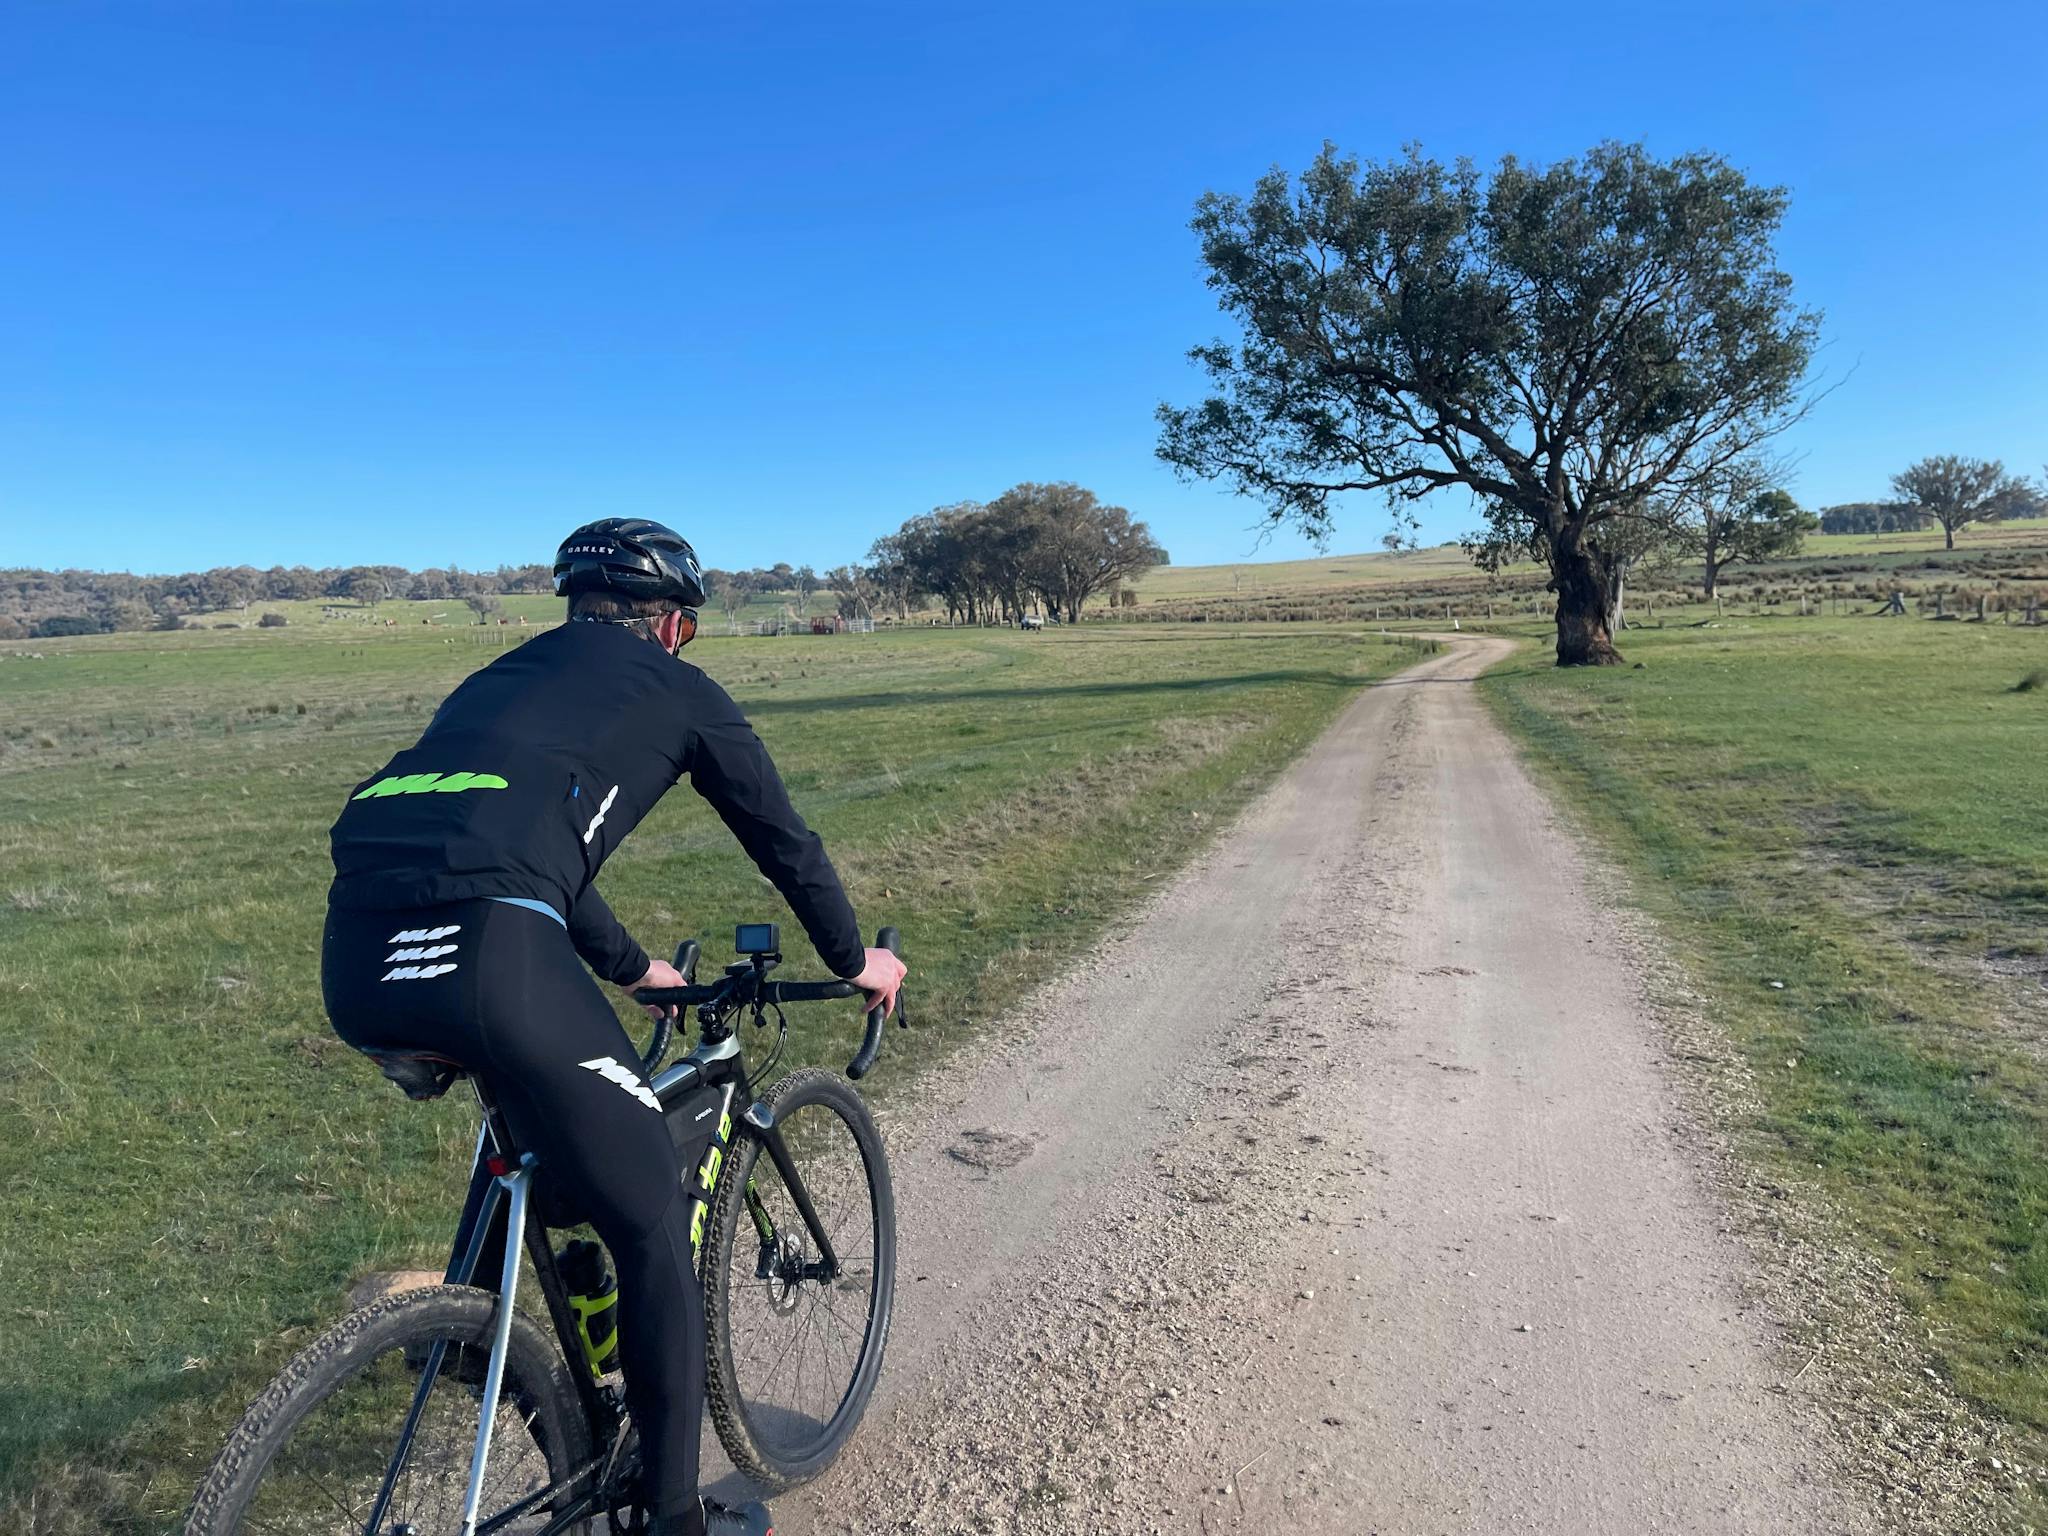 Cyclist in black on gravel road grass on either side of road tree in background and blue sky